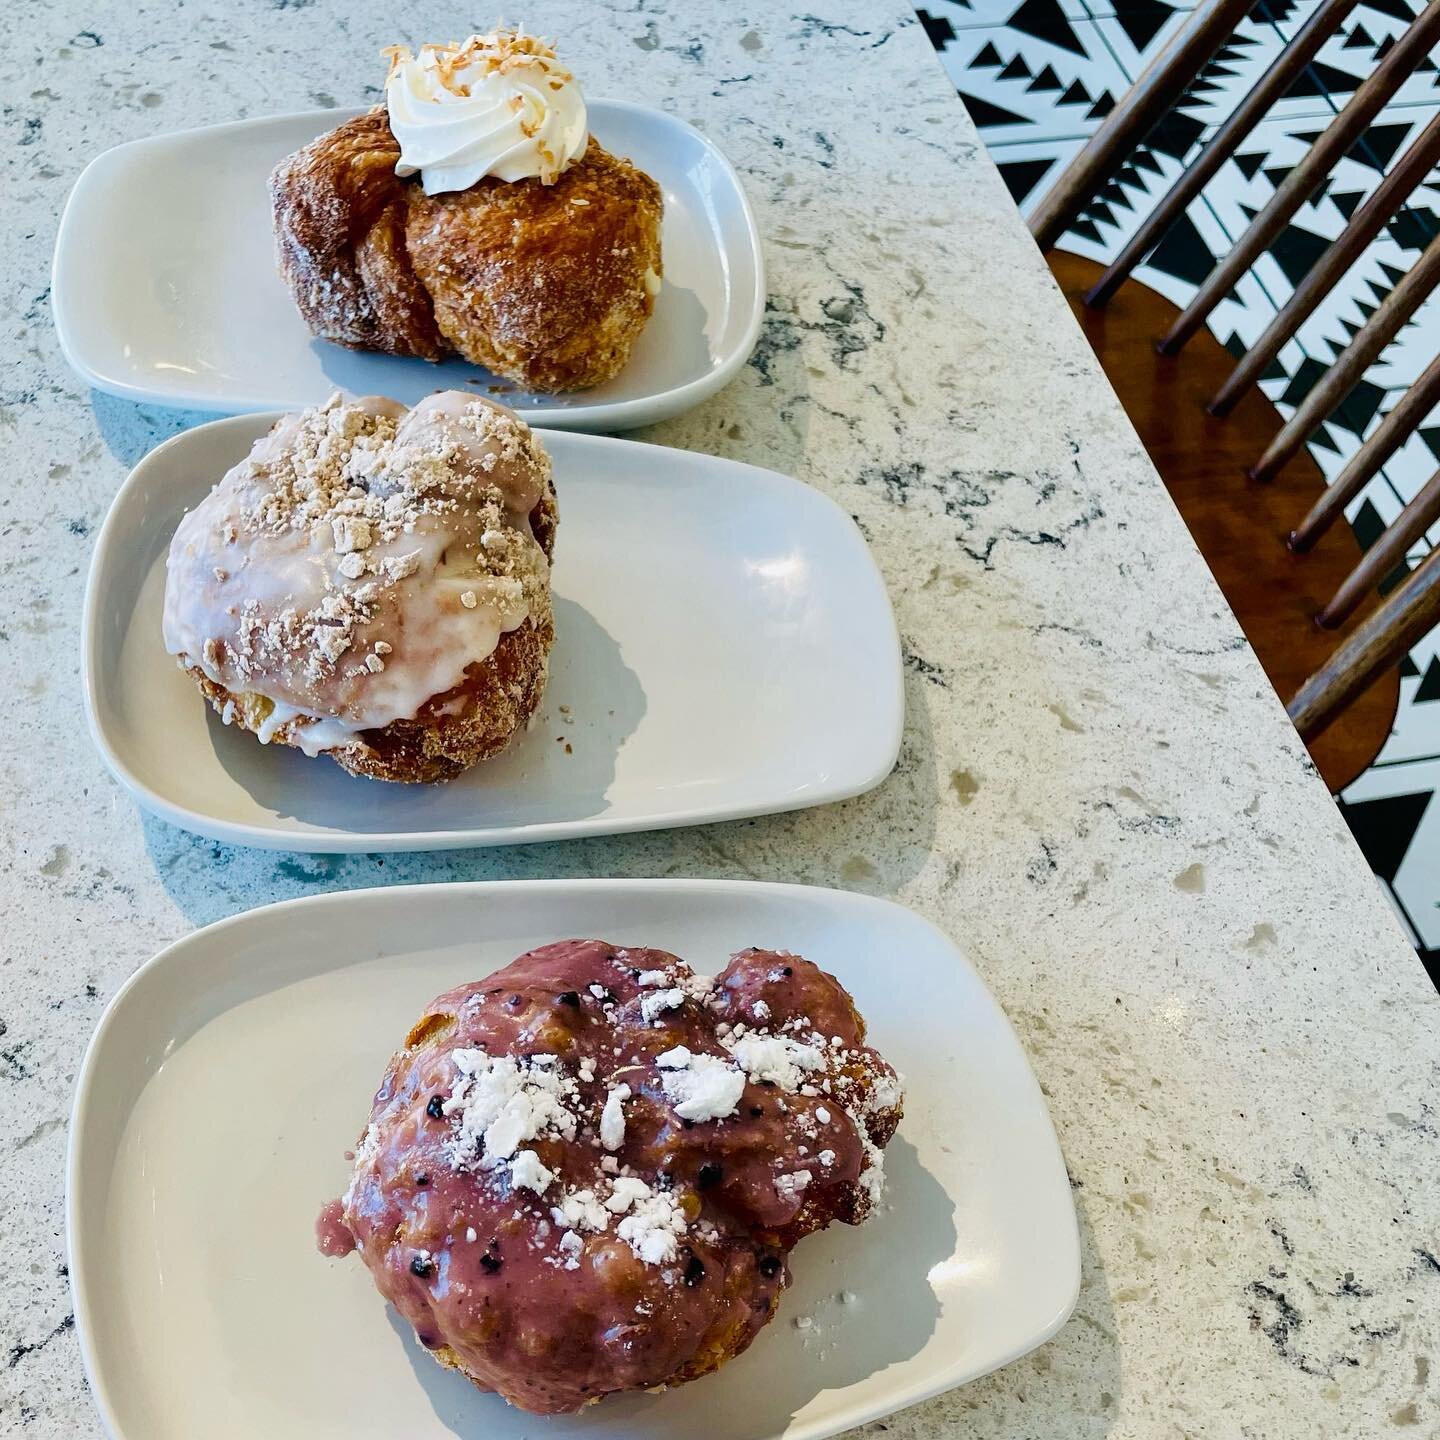 📍 @parlordoughnutsbranson has chewy, airy donuts with the perfect sweetness! We loved them! Here is blueberry hill, sandy beach (cinnamon roll flavors), and coconut cream filled. Not pictured but also delicious: spinach pesto breakfast sandwich, bre